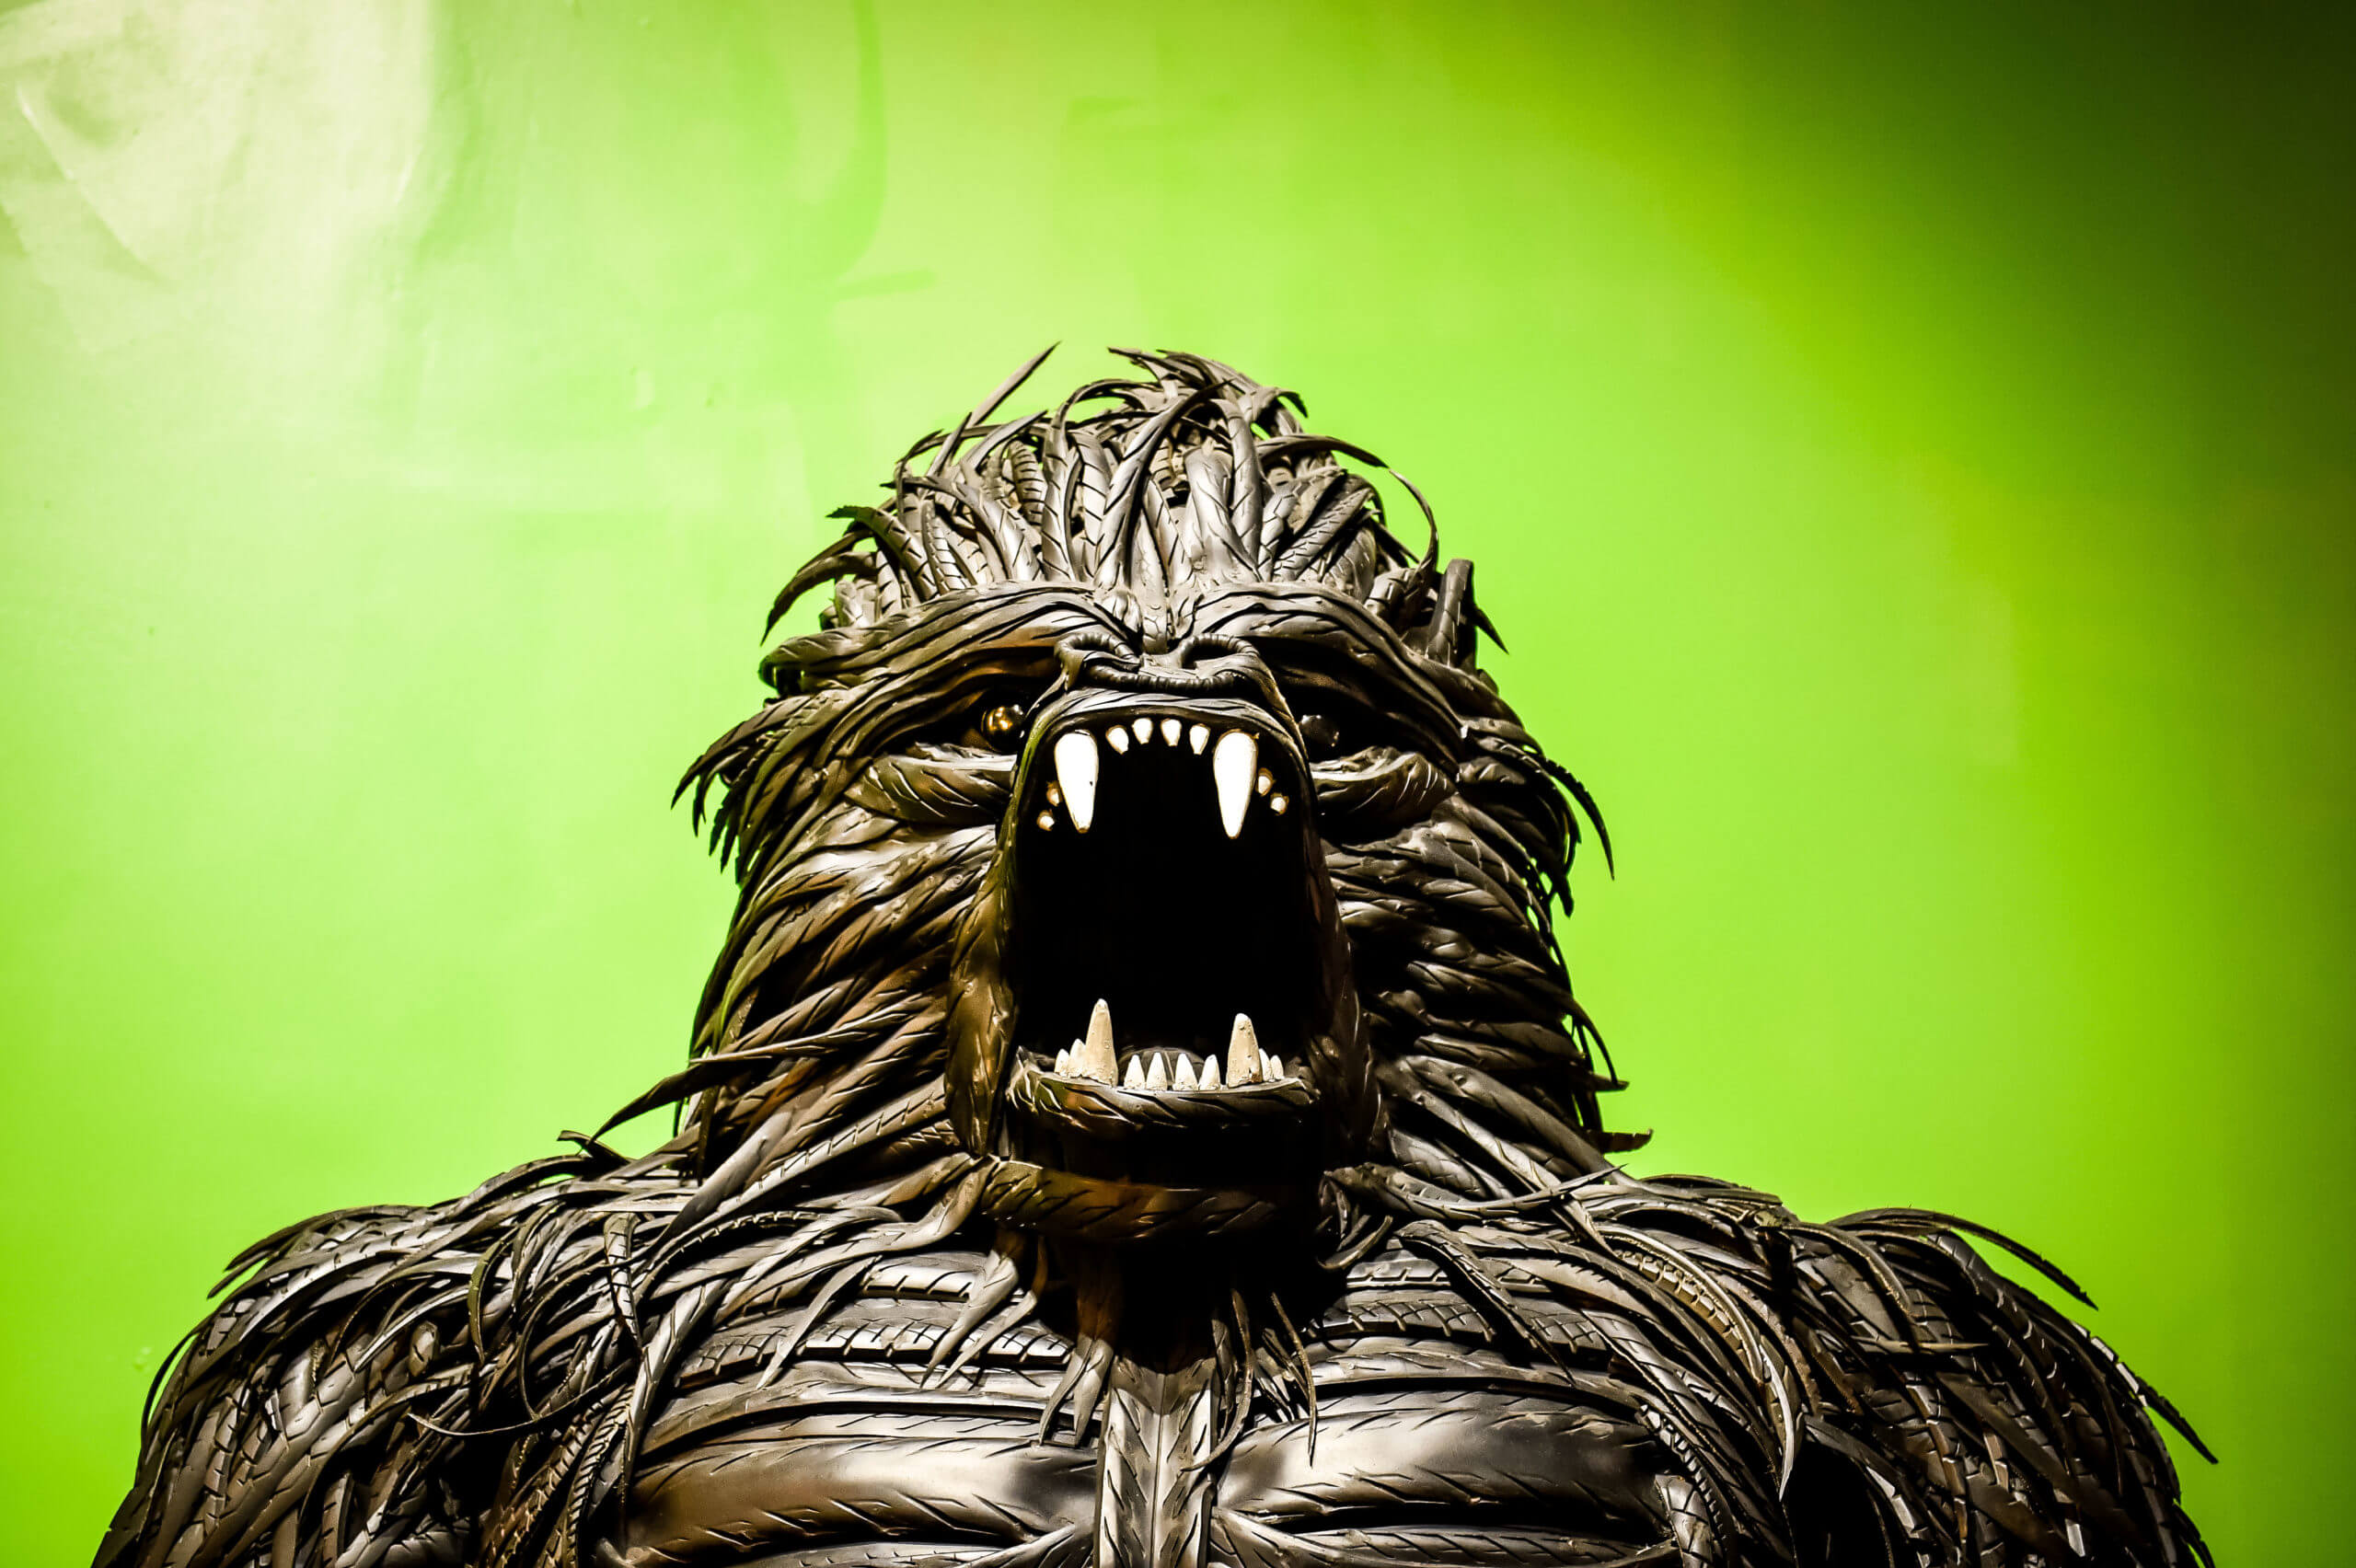 A view of a godzilla action figure shows the face with mouth open and teeth showing.